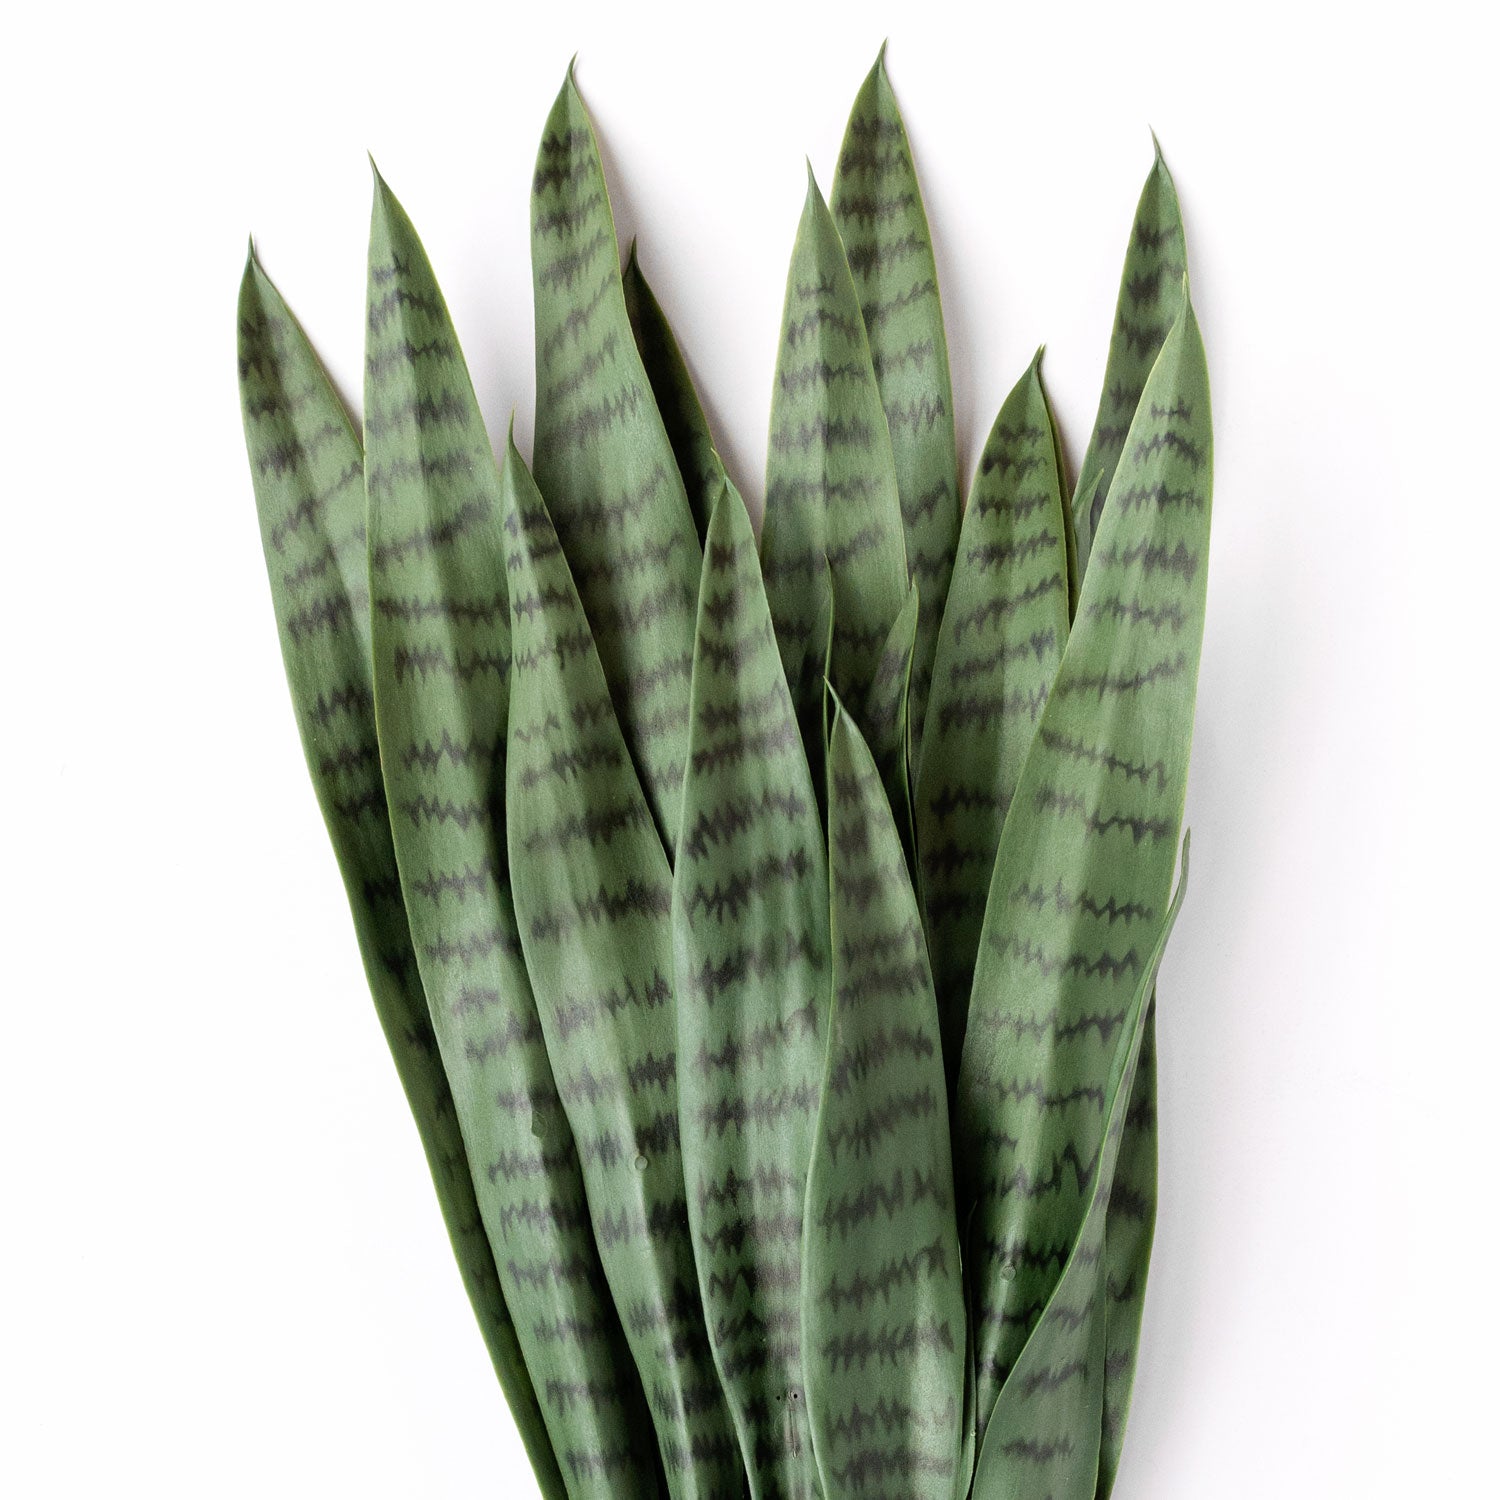 Outdoor Sansevieria Green Plant Set Unpotted, 18"H